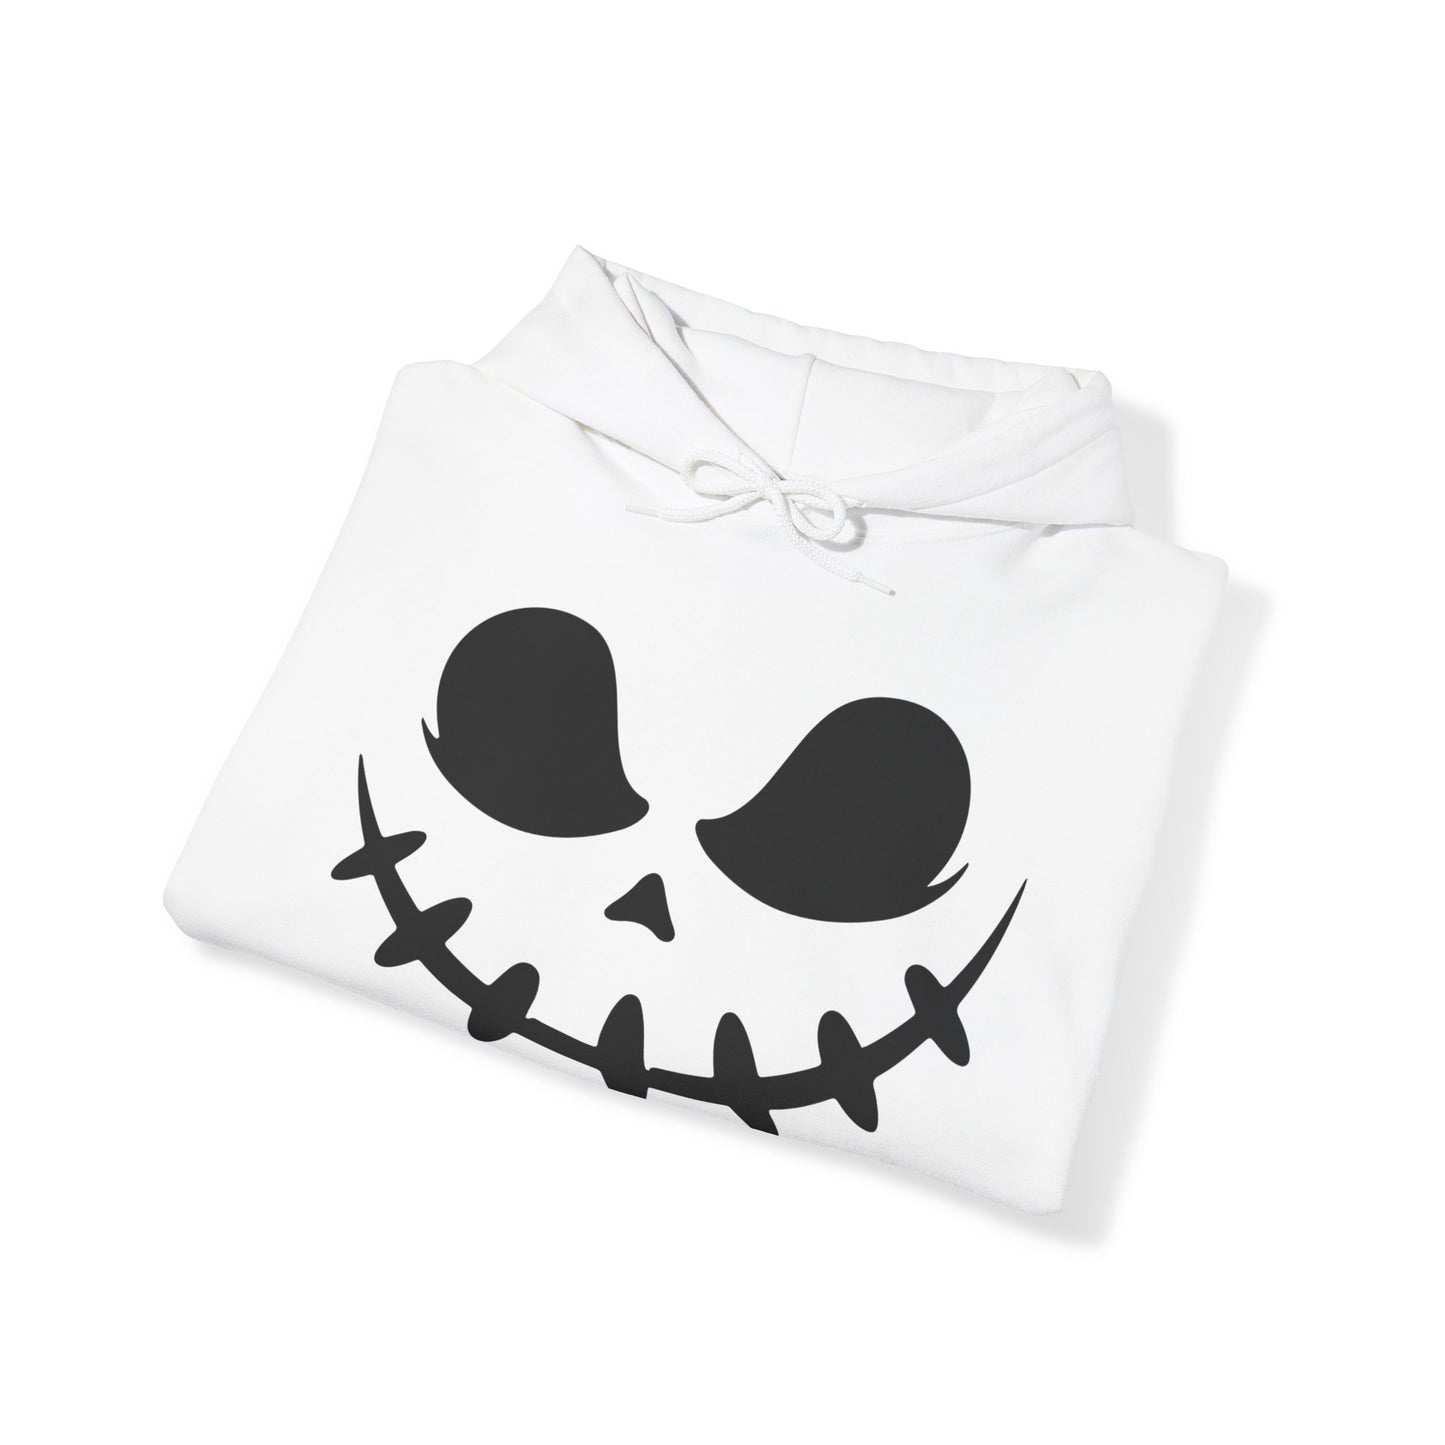 Halloween Hoodie for Scary Pumpkin Face Sweatshirt For Trick Or Treat Costume